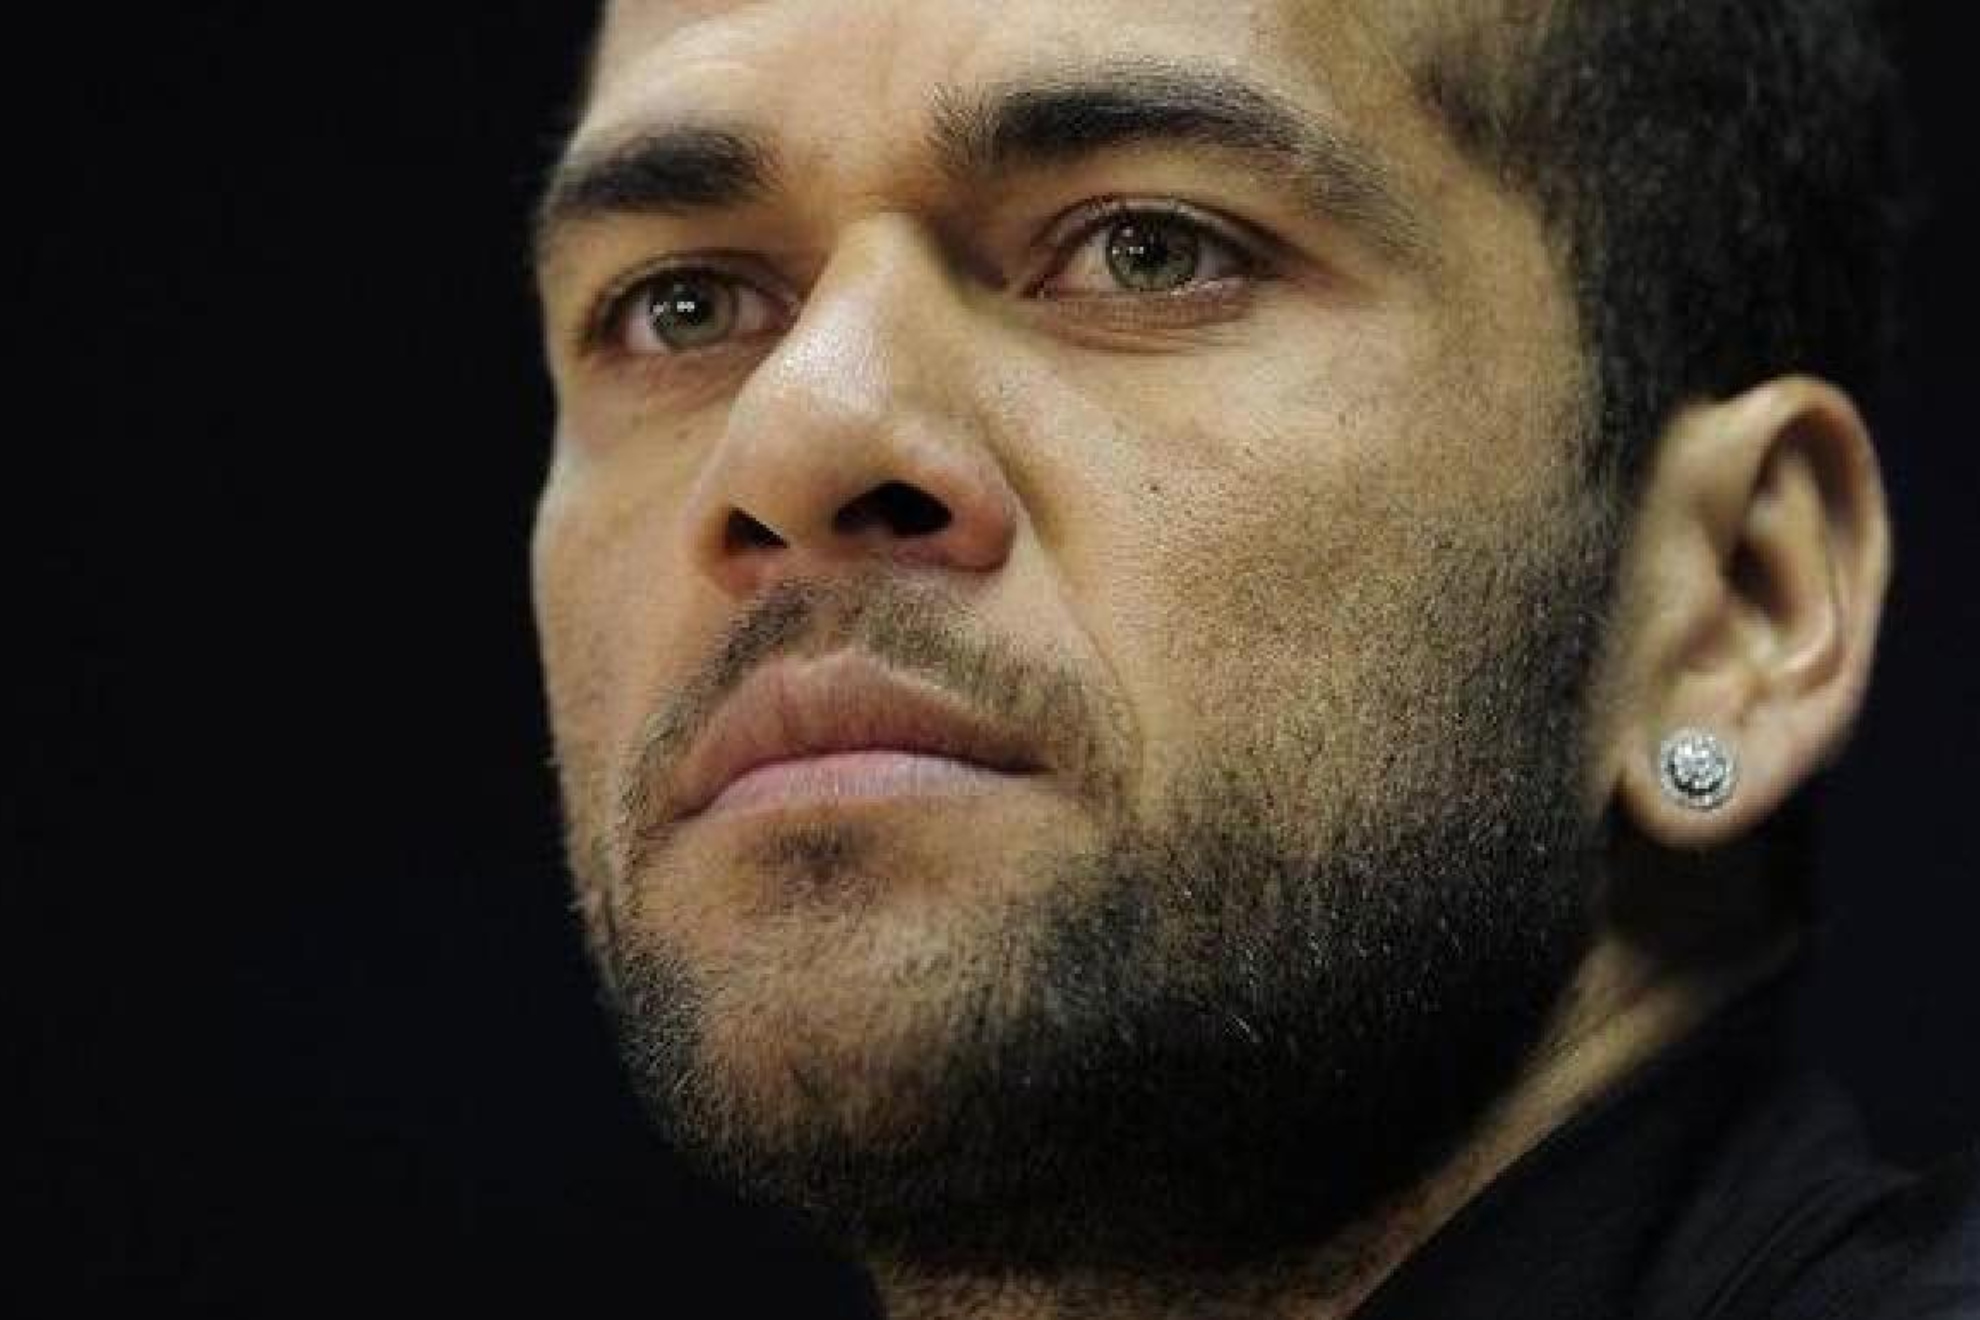 Dani Alves breaks his silence from prison: I dont know if she has a clear conscience, but I forgive her